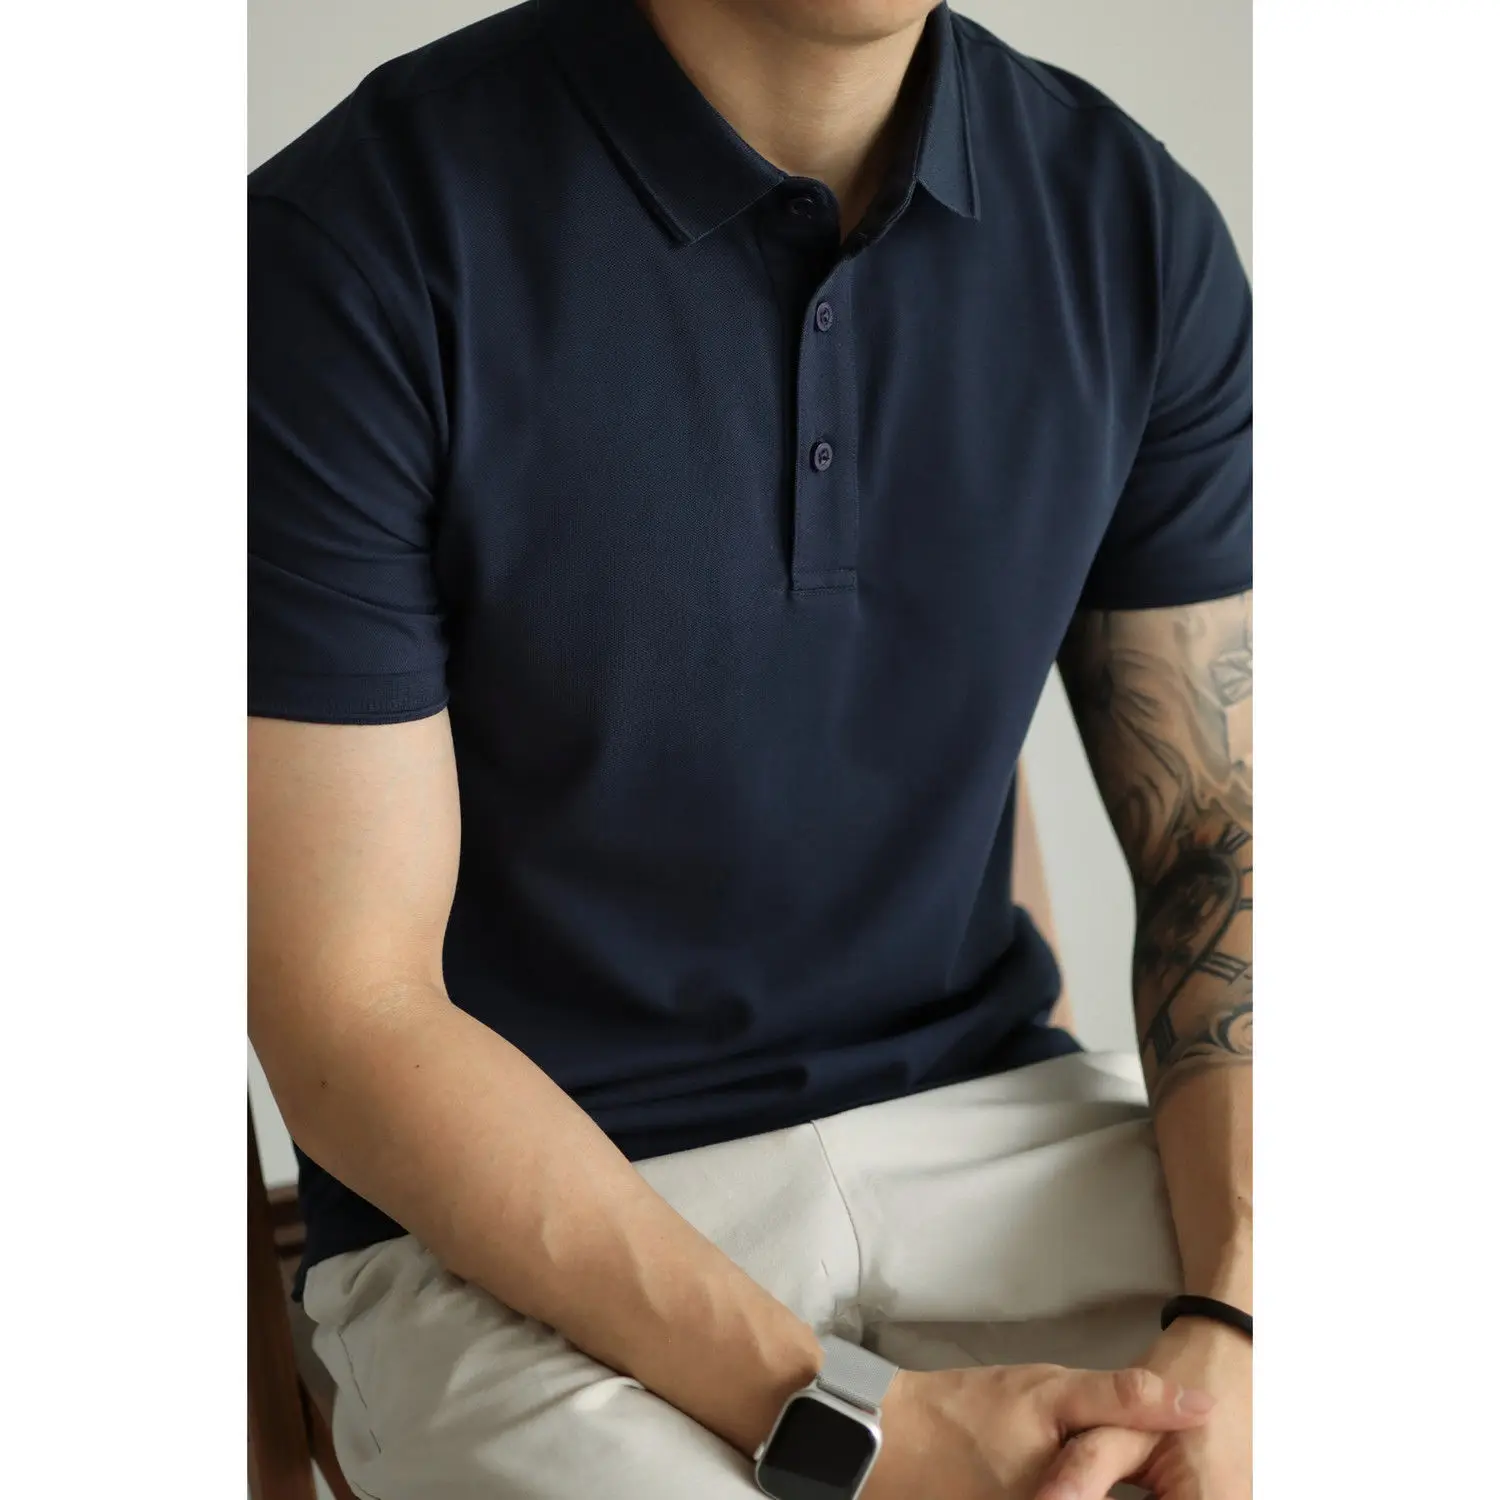 

High Quality 5A Antibacterial Polo Shirt Men Pique Fabric Lapel Business Casual Solid Color Short Sleeve Polo T Shirt for Men